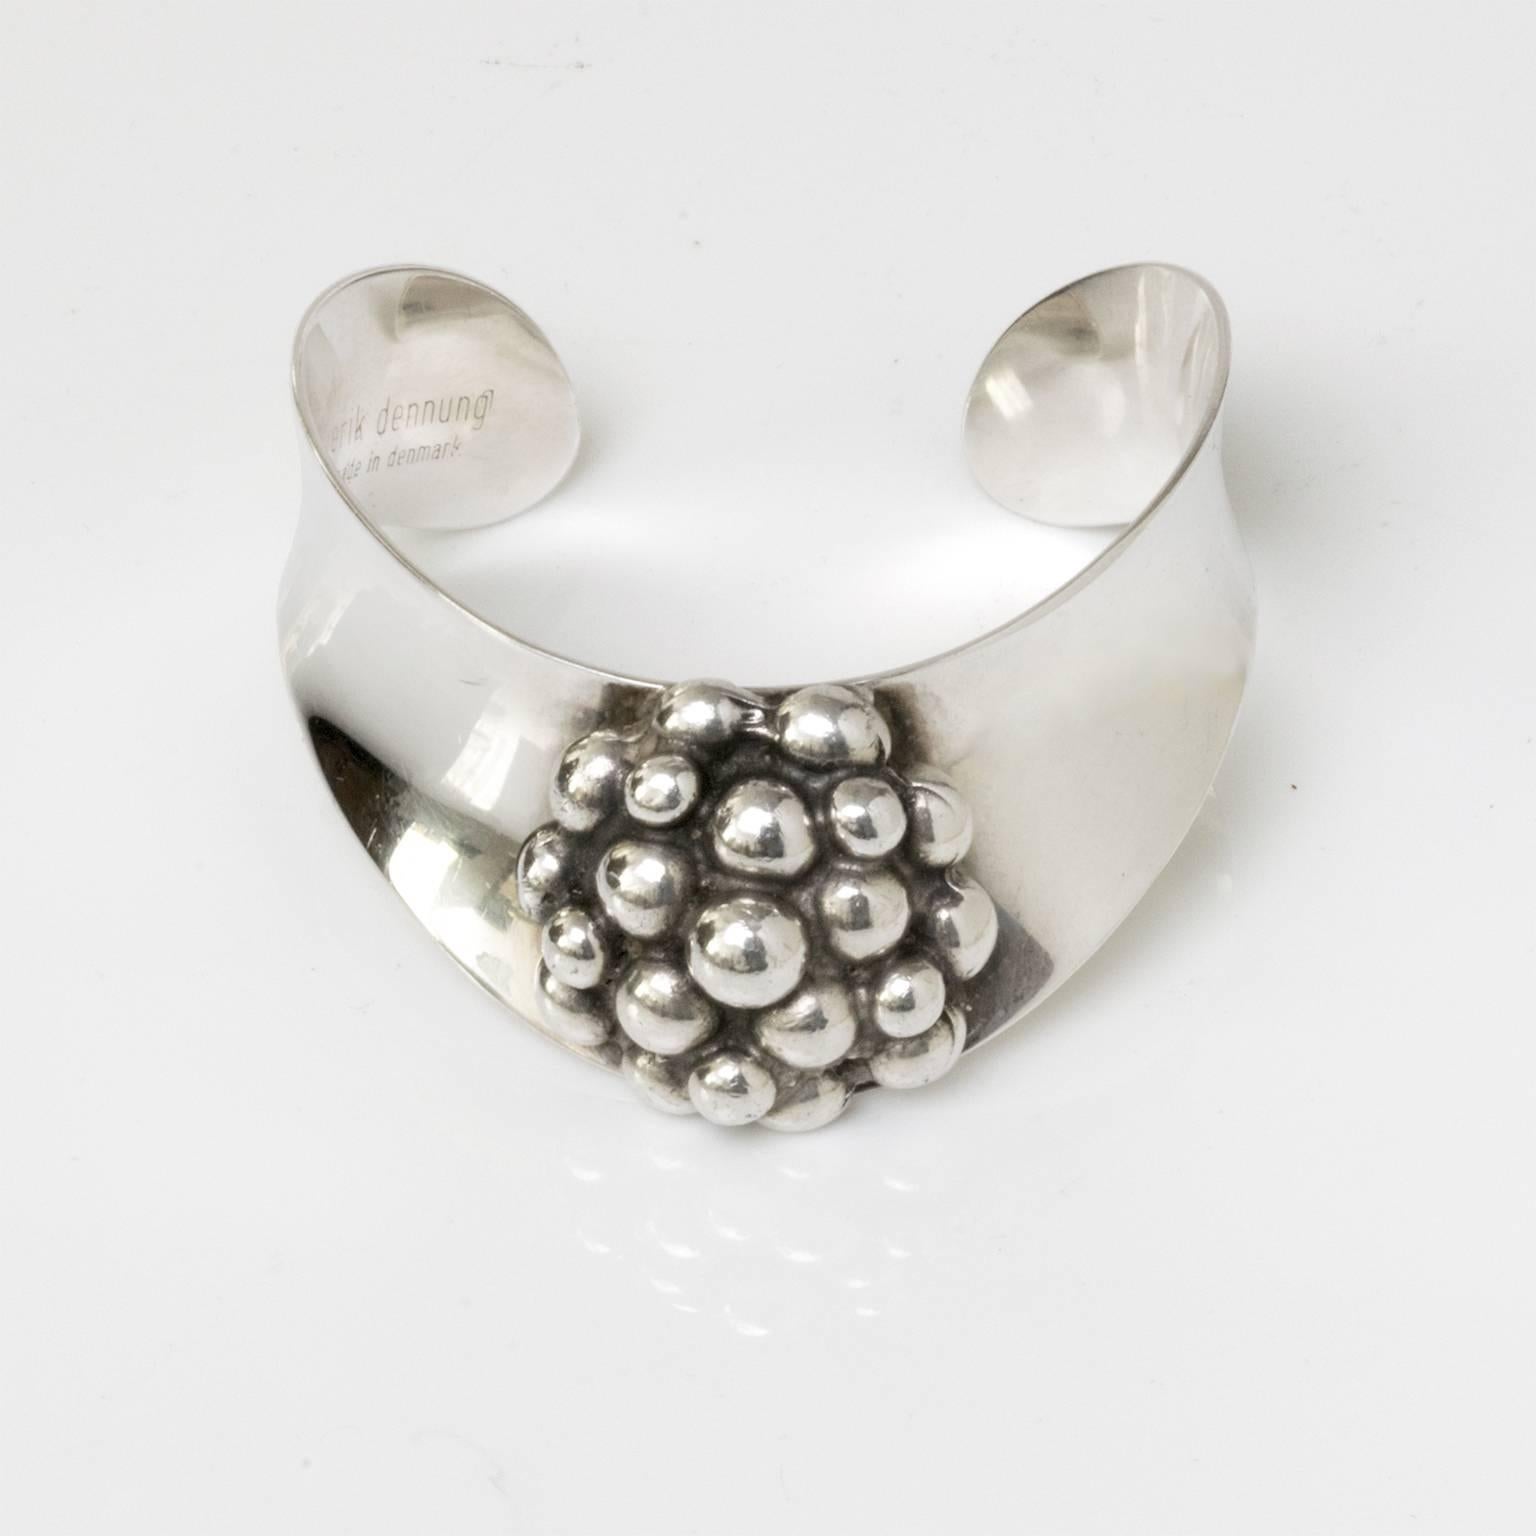 A Scandinavian Modern silver bracelet in a soft organic form detailed with a cluster of balls. Designed by Jens Andersen and Erik Dennung, 1960s, Denmark.
Diameter: 2.25